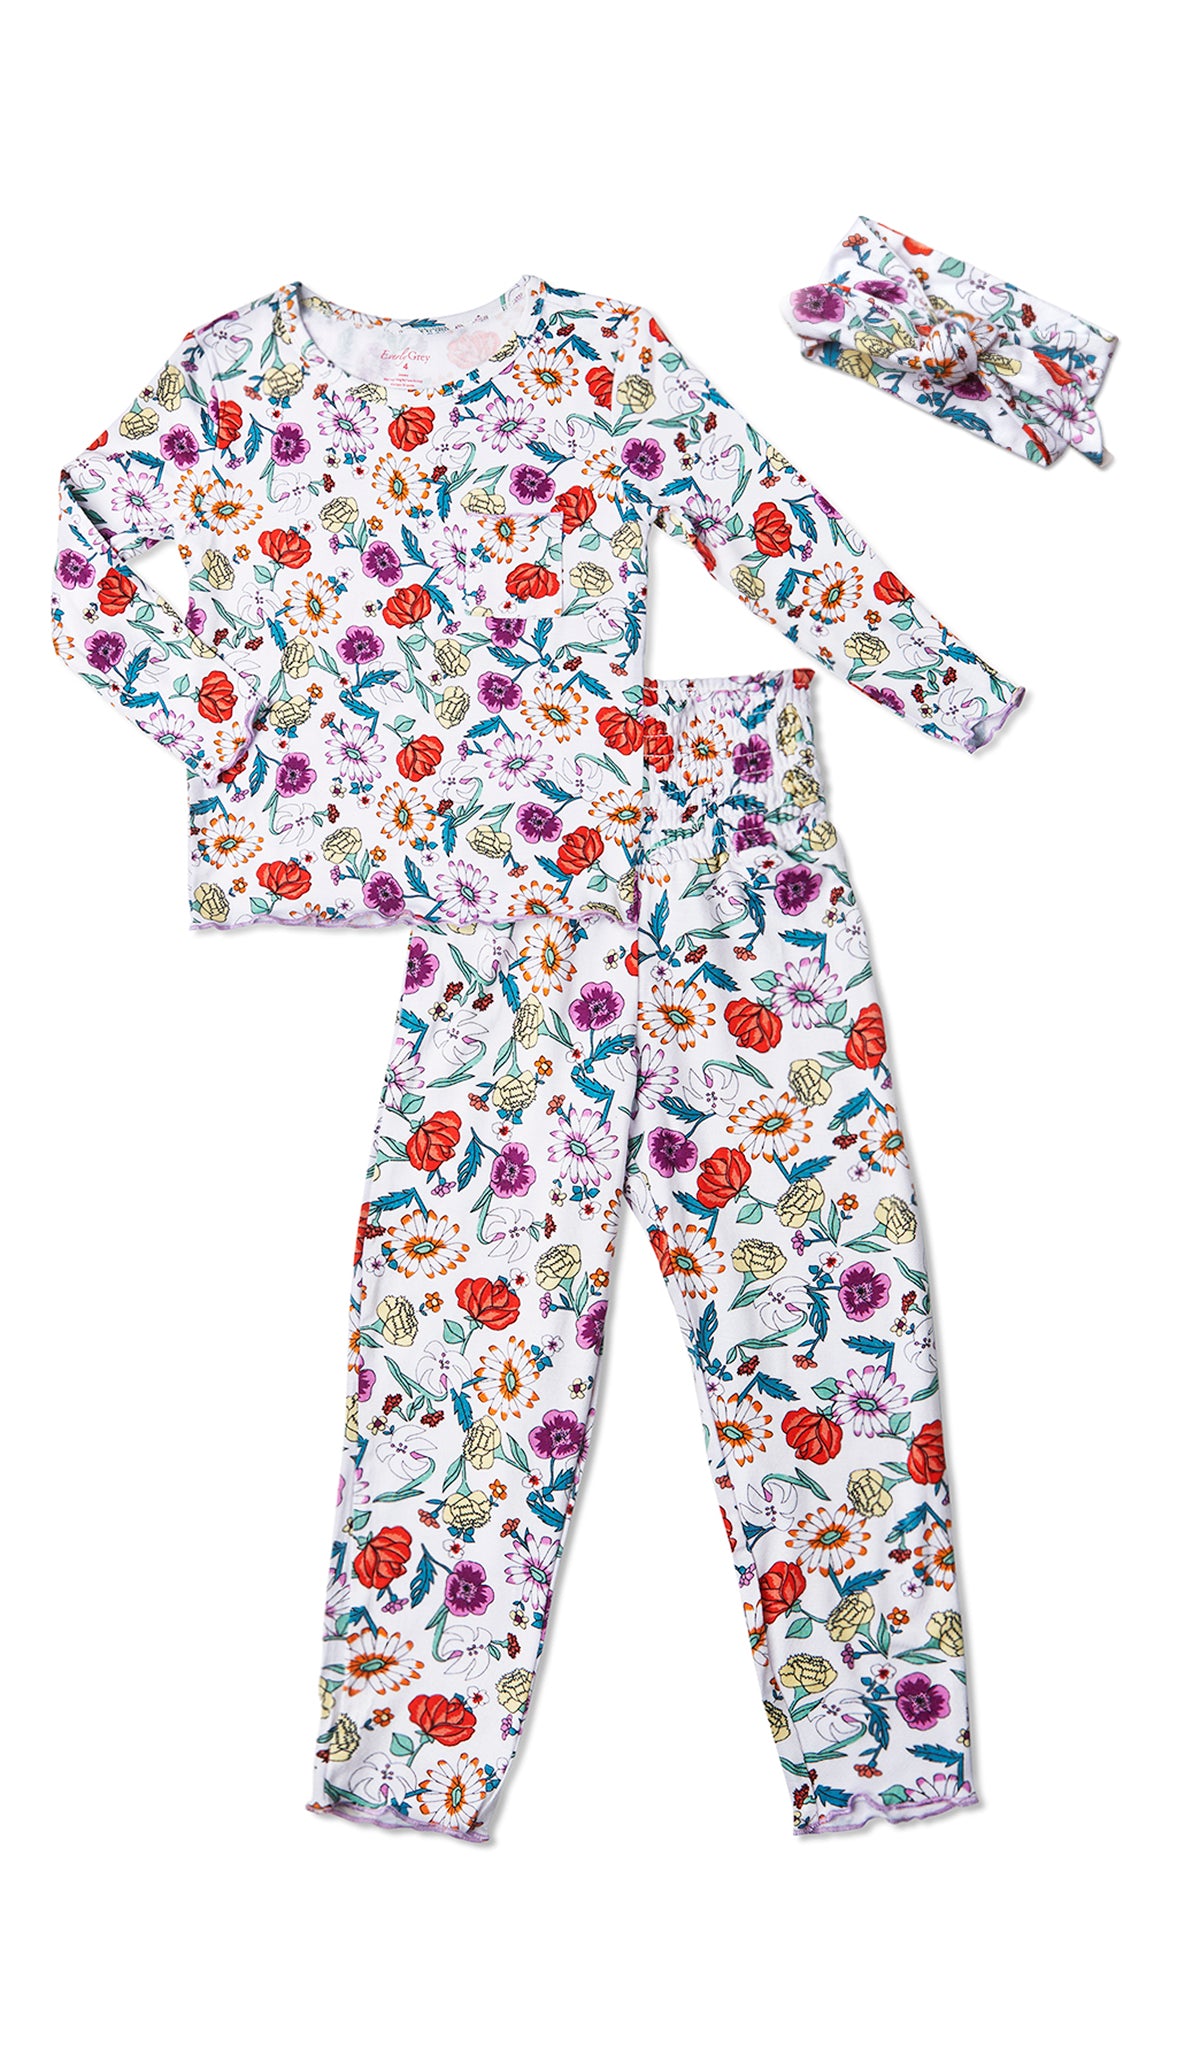 Zinnia Charlie Kids 3-Piece Pant PJ. Long sleeve top with smocked waistband pant and matching headwrap. Lettuce trim detail on sleeve edge, top and pant hem.